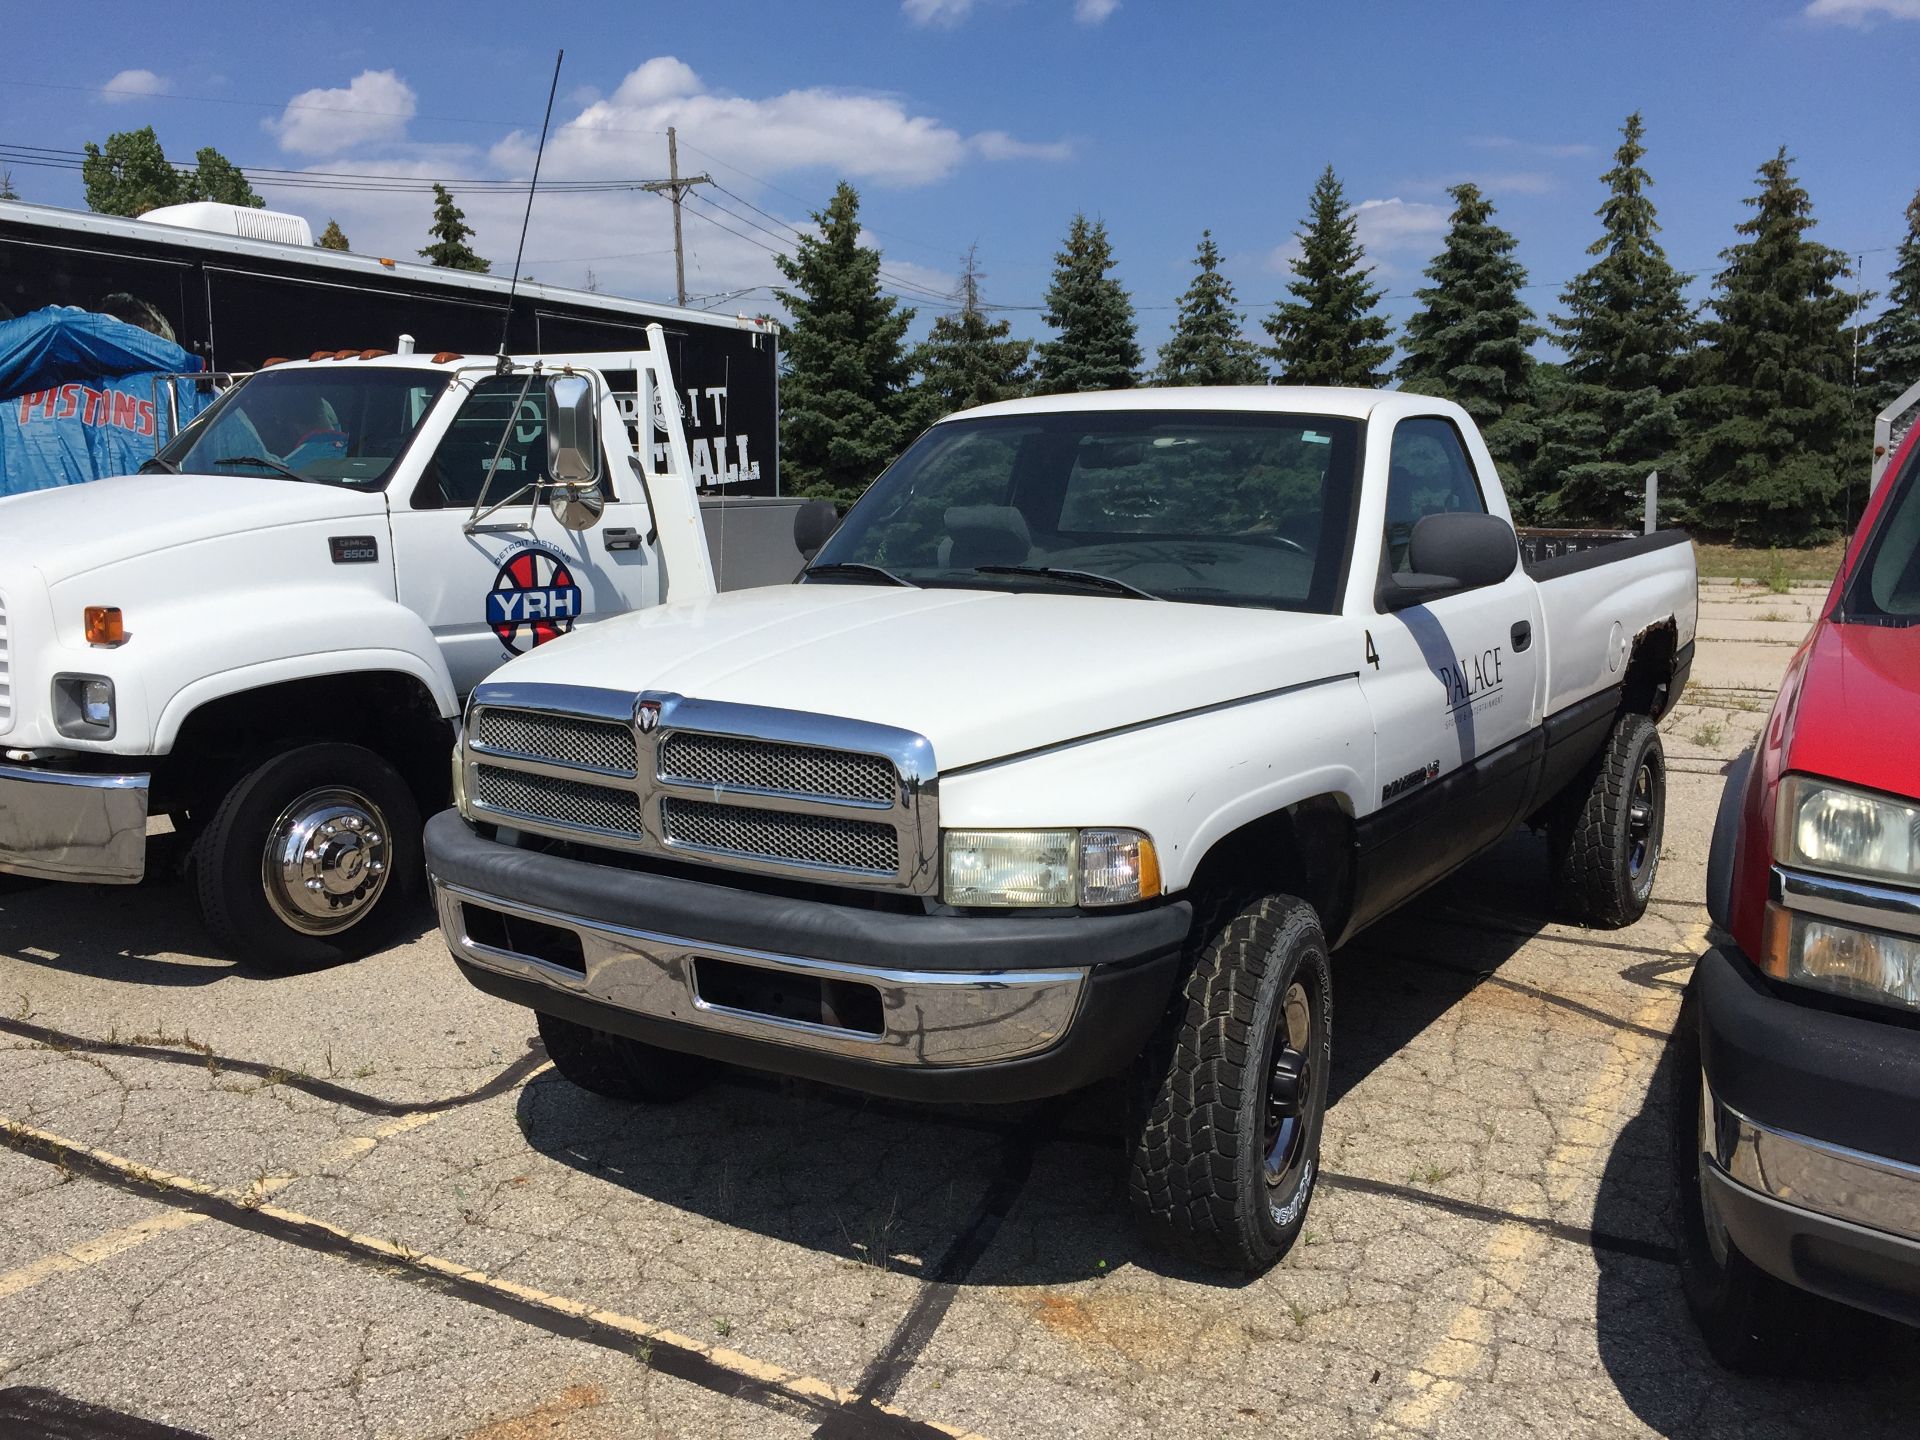 Motor Vehicle Year: 2001 Dodge Ram/ CA59601 Approx. Miles: 57652 Location: Palace Vehicle No: 4